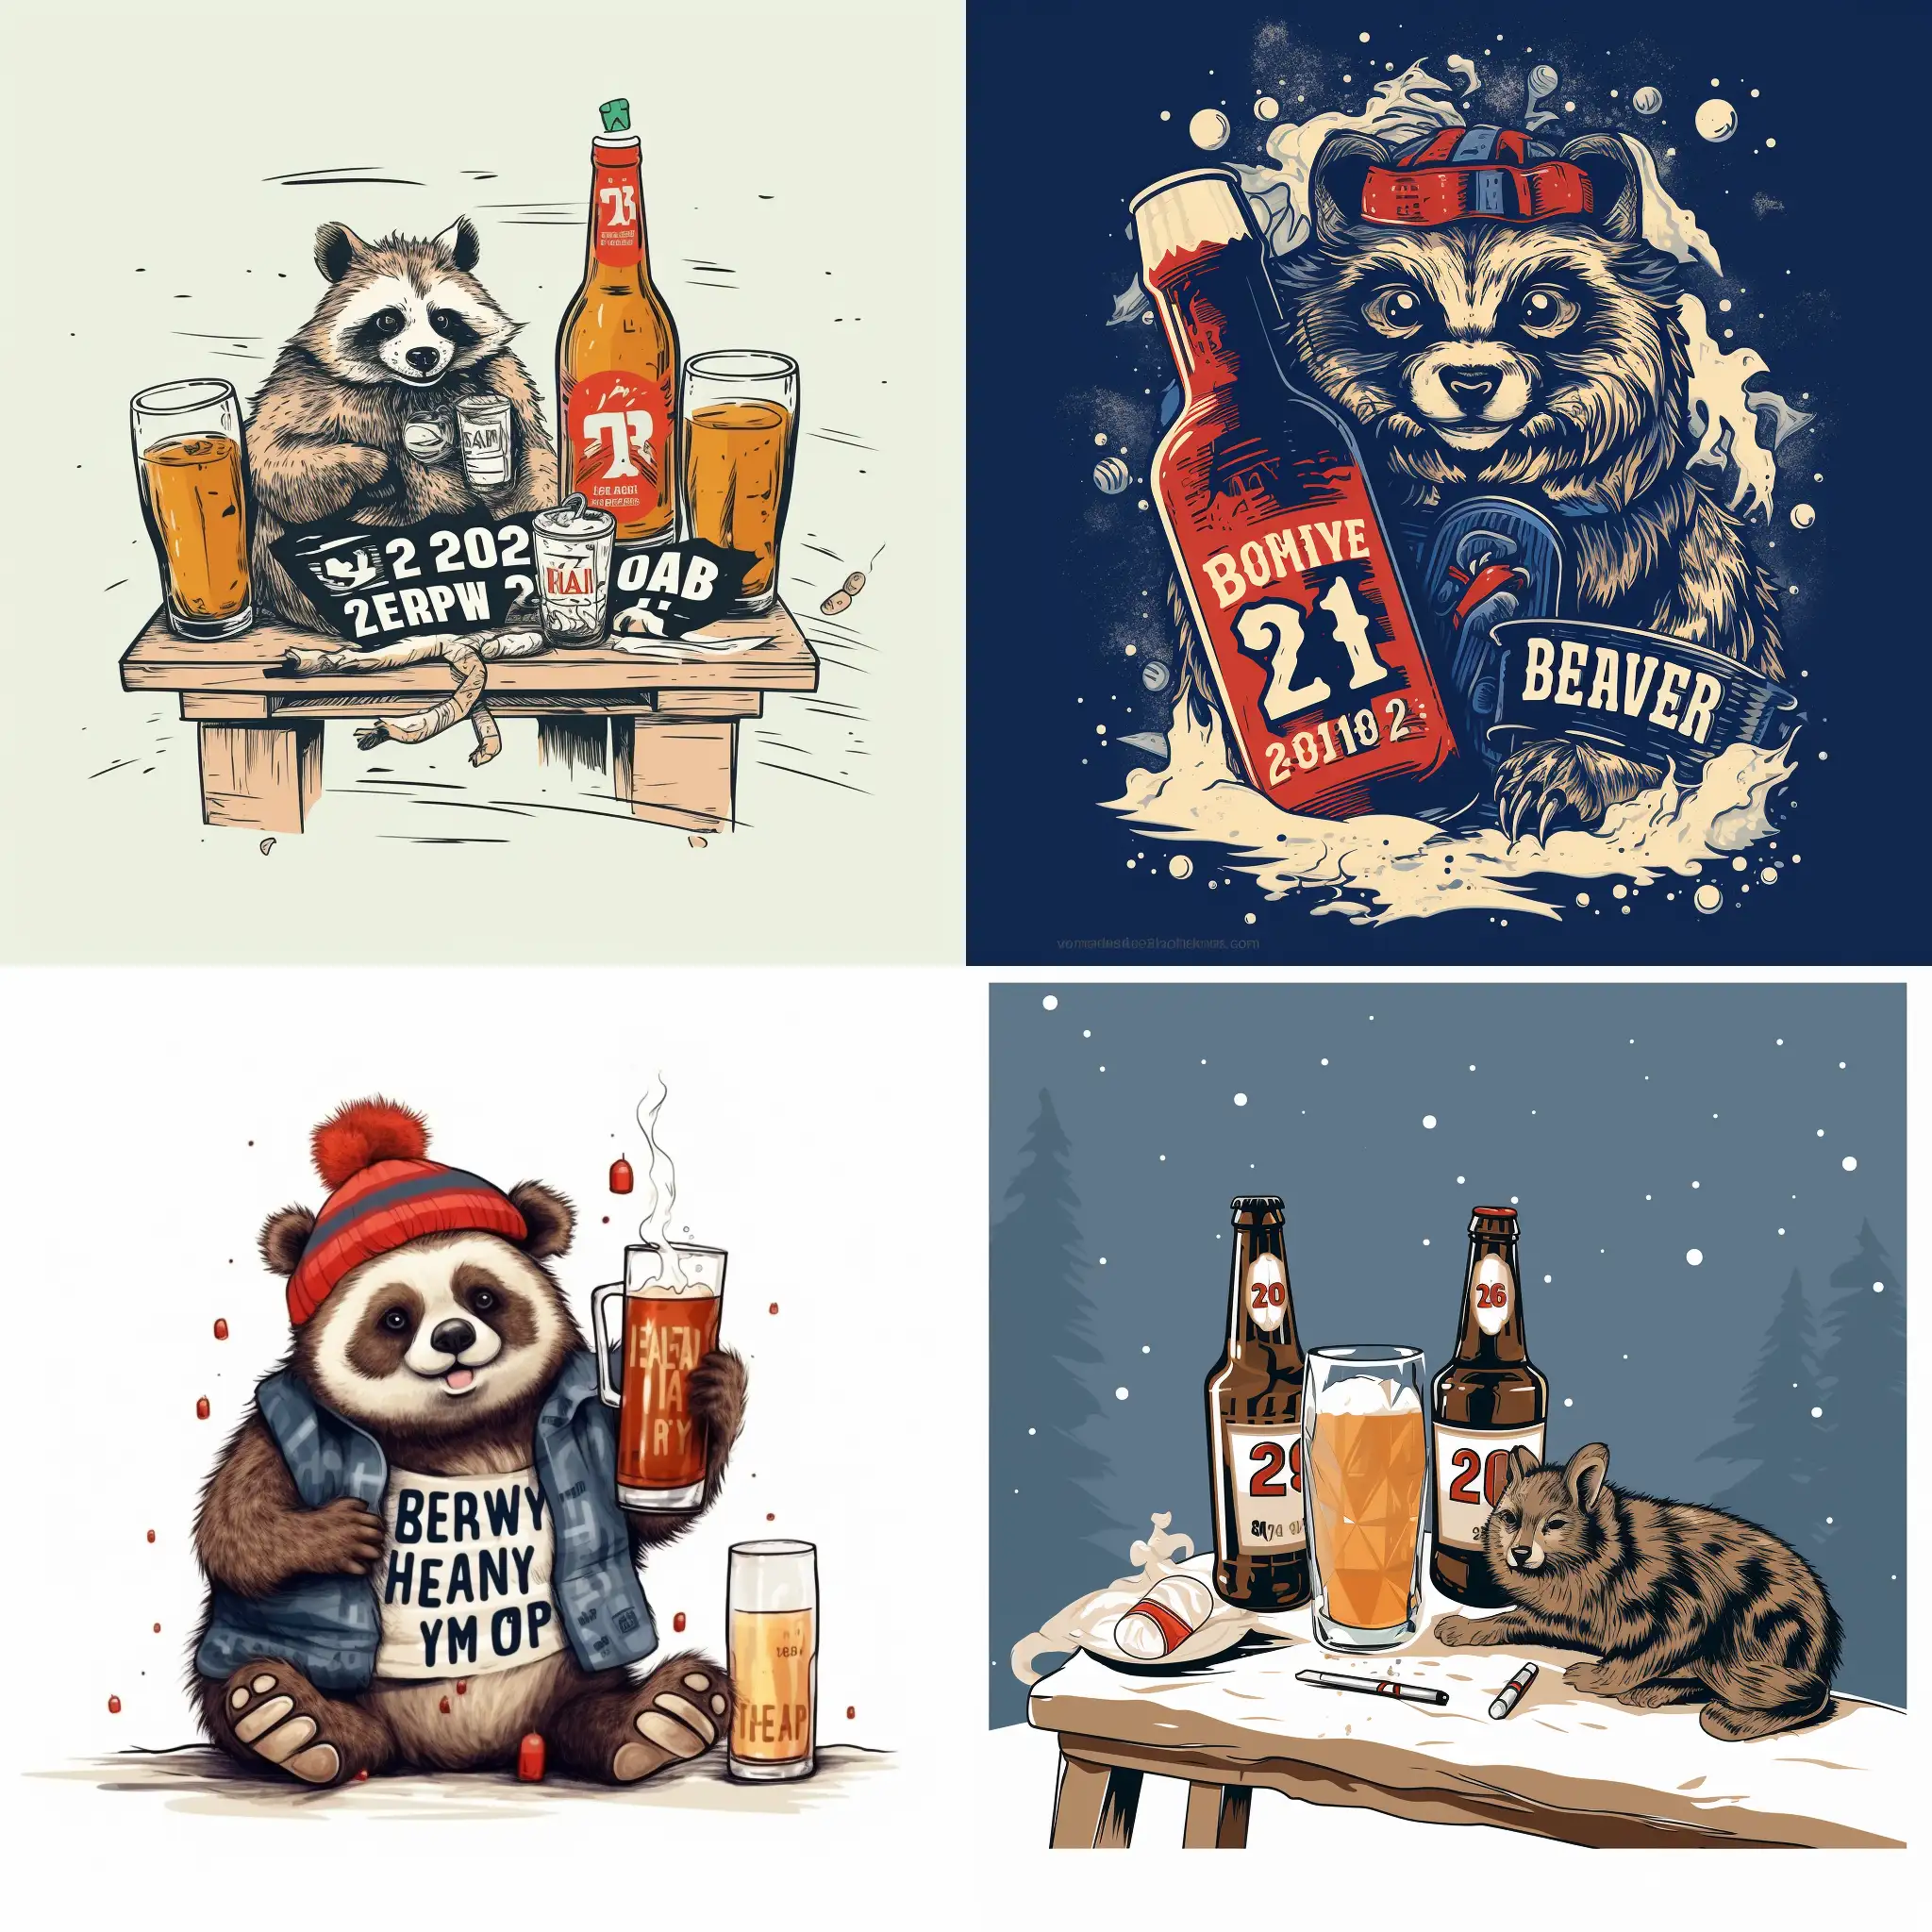 Humorous-New-Year-Greeting-Card-2024-Featuring-Beer-and-a-Playful-Raccoon